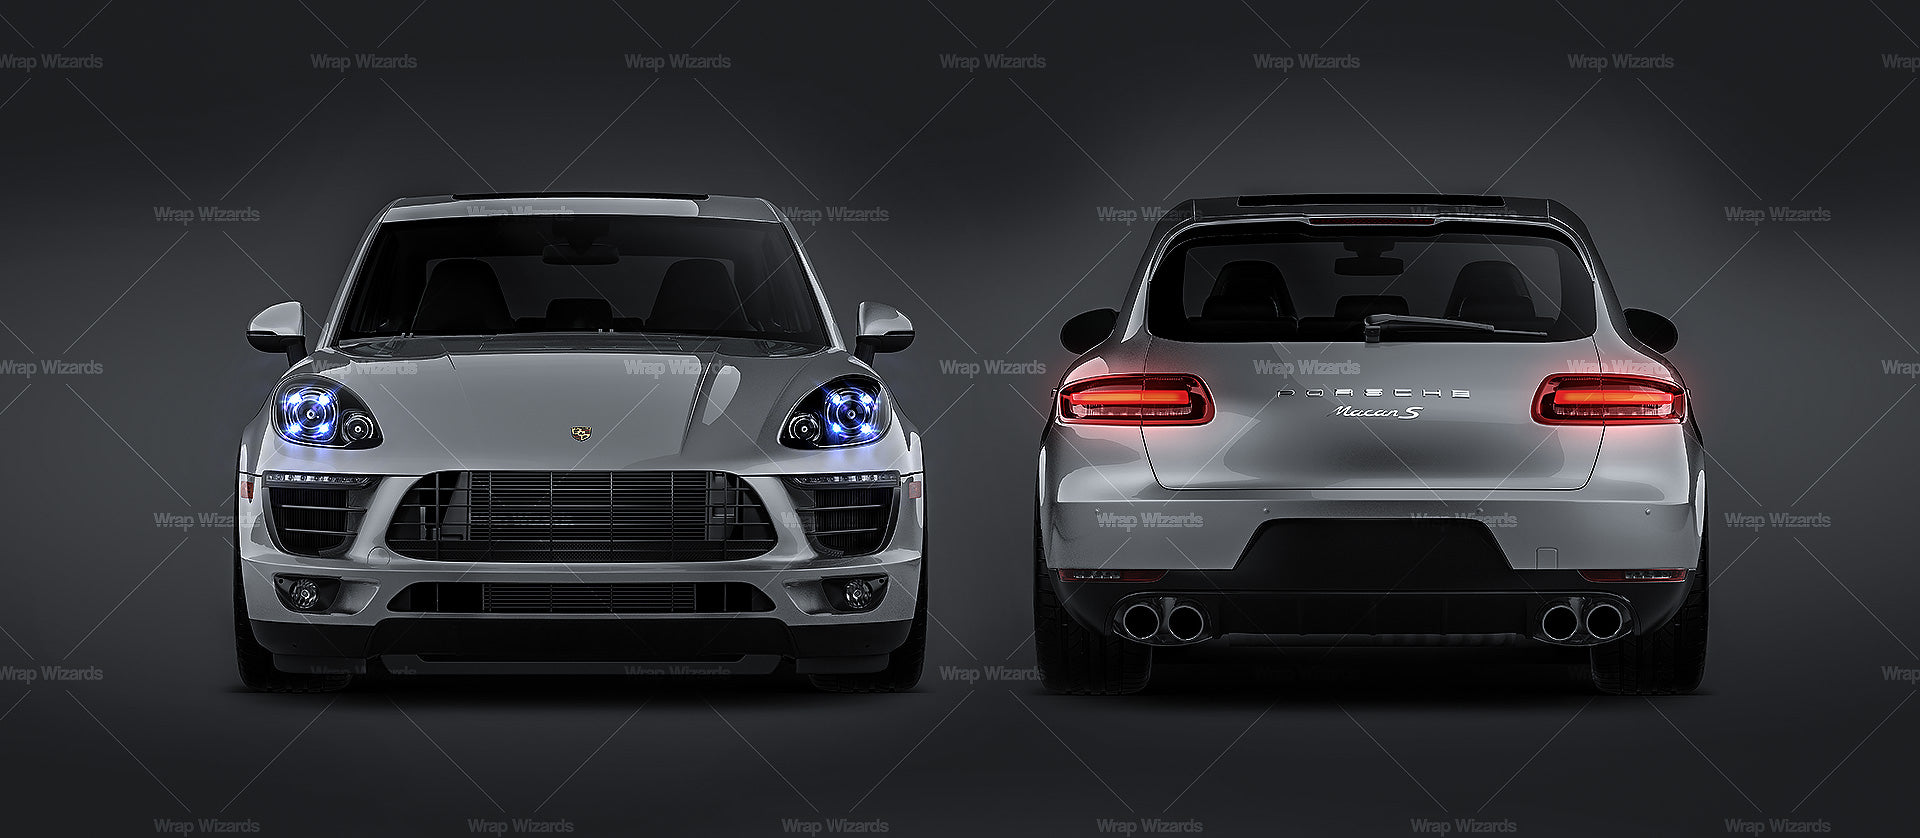 Porsche Macan Turbo S glossy finish - all sides Car Mockup Template.psd